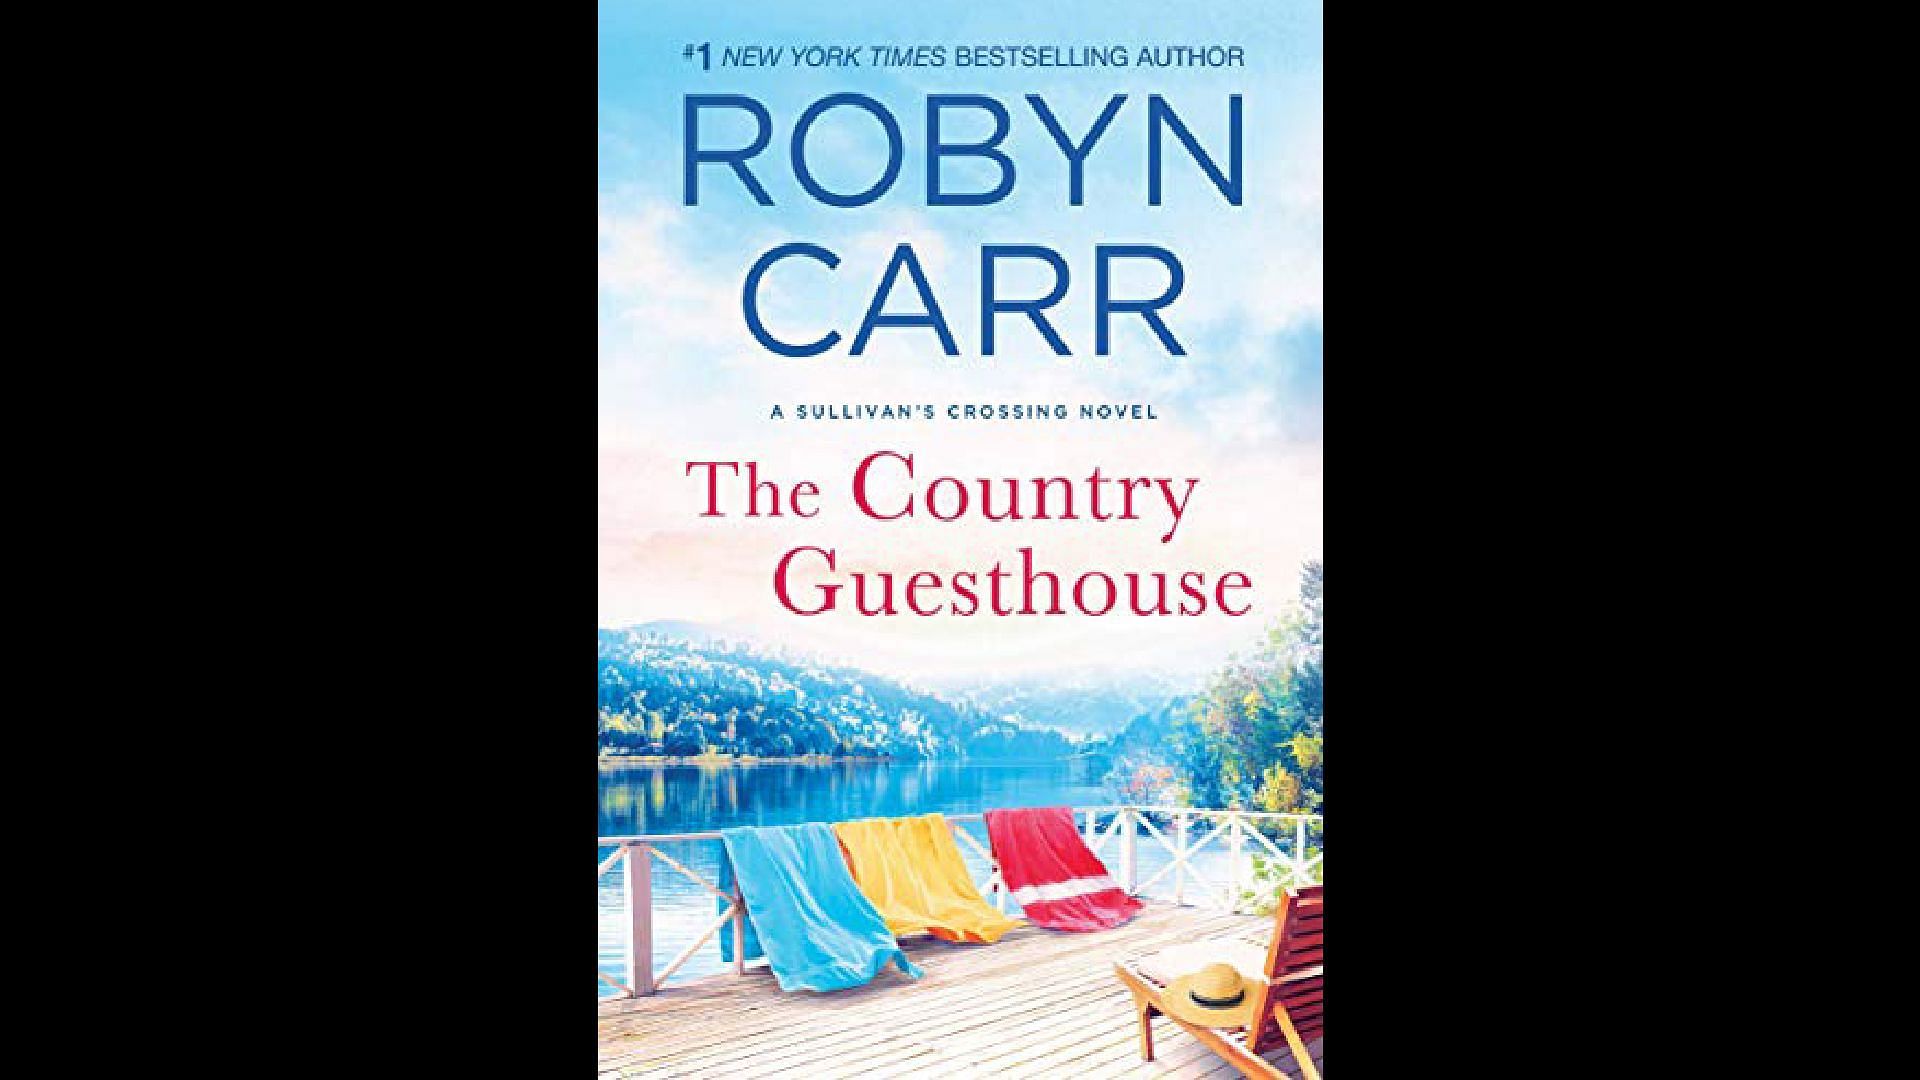 Robyn Carr&#039;s The Country Guesthouse (Image via GoodReads)